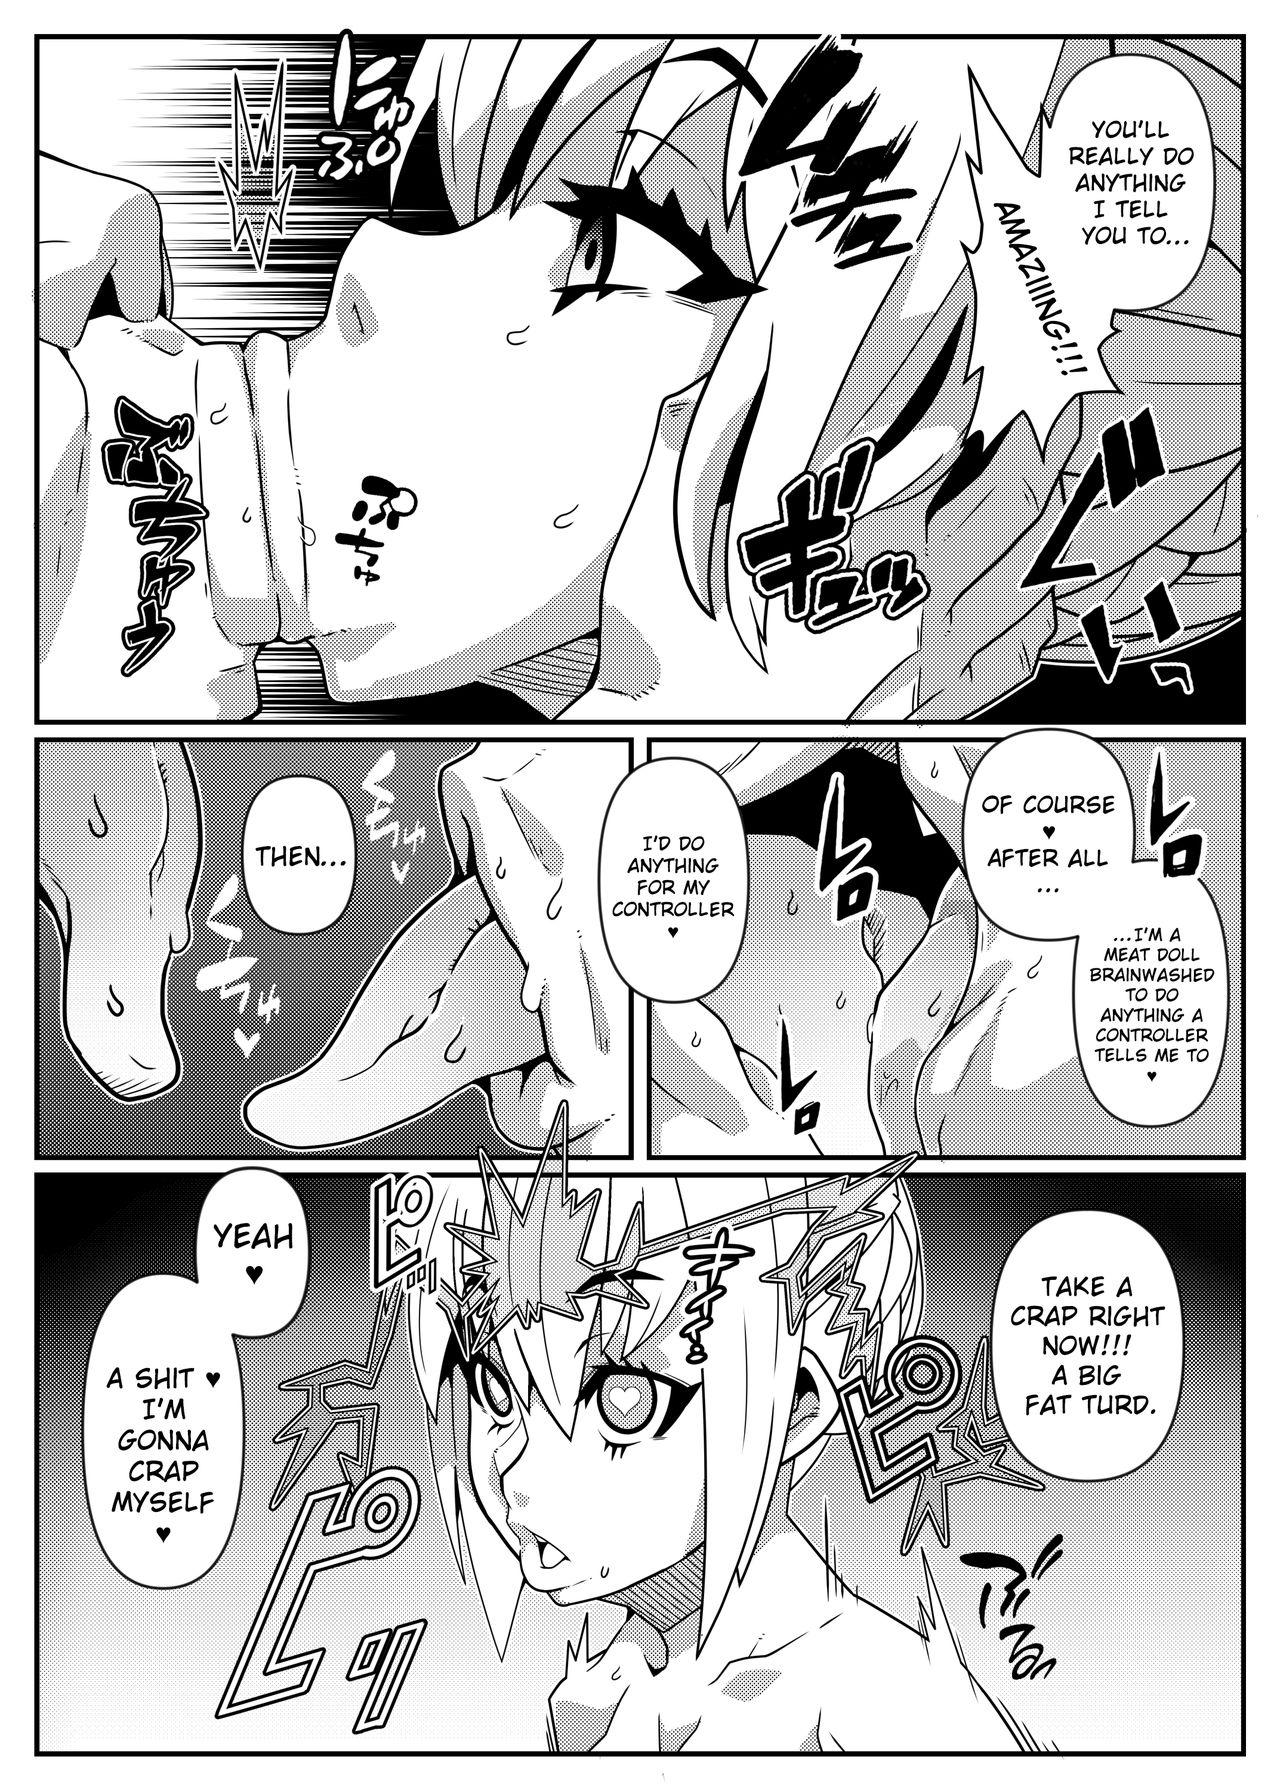 Camshow MIND CONTROL GIRL 14 - Fate grand order Sexcam - Page 8